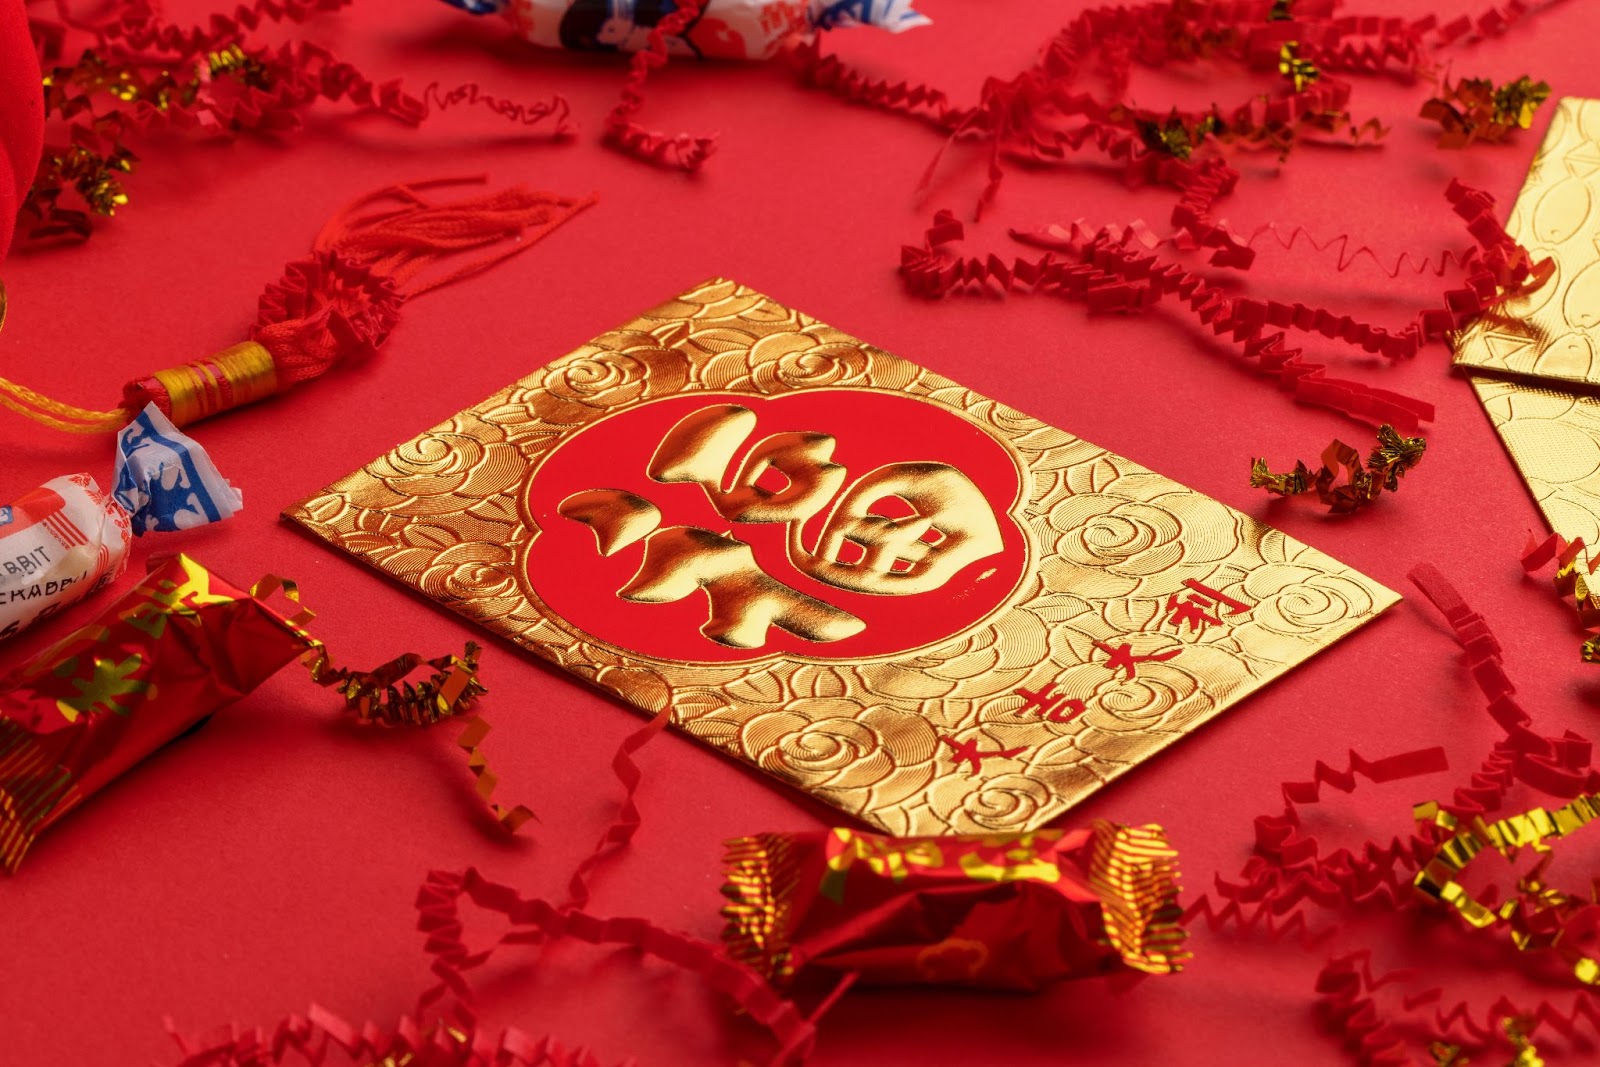 Gold paper is auspicious, bringing prosperity for the year